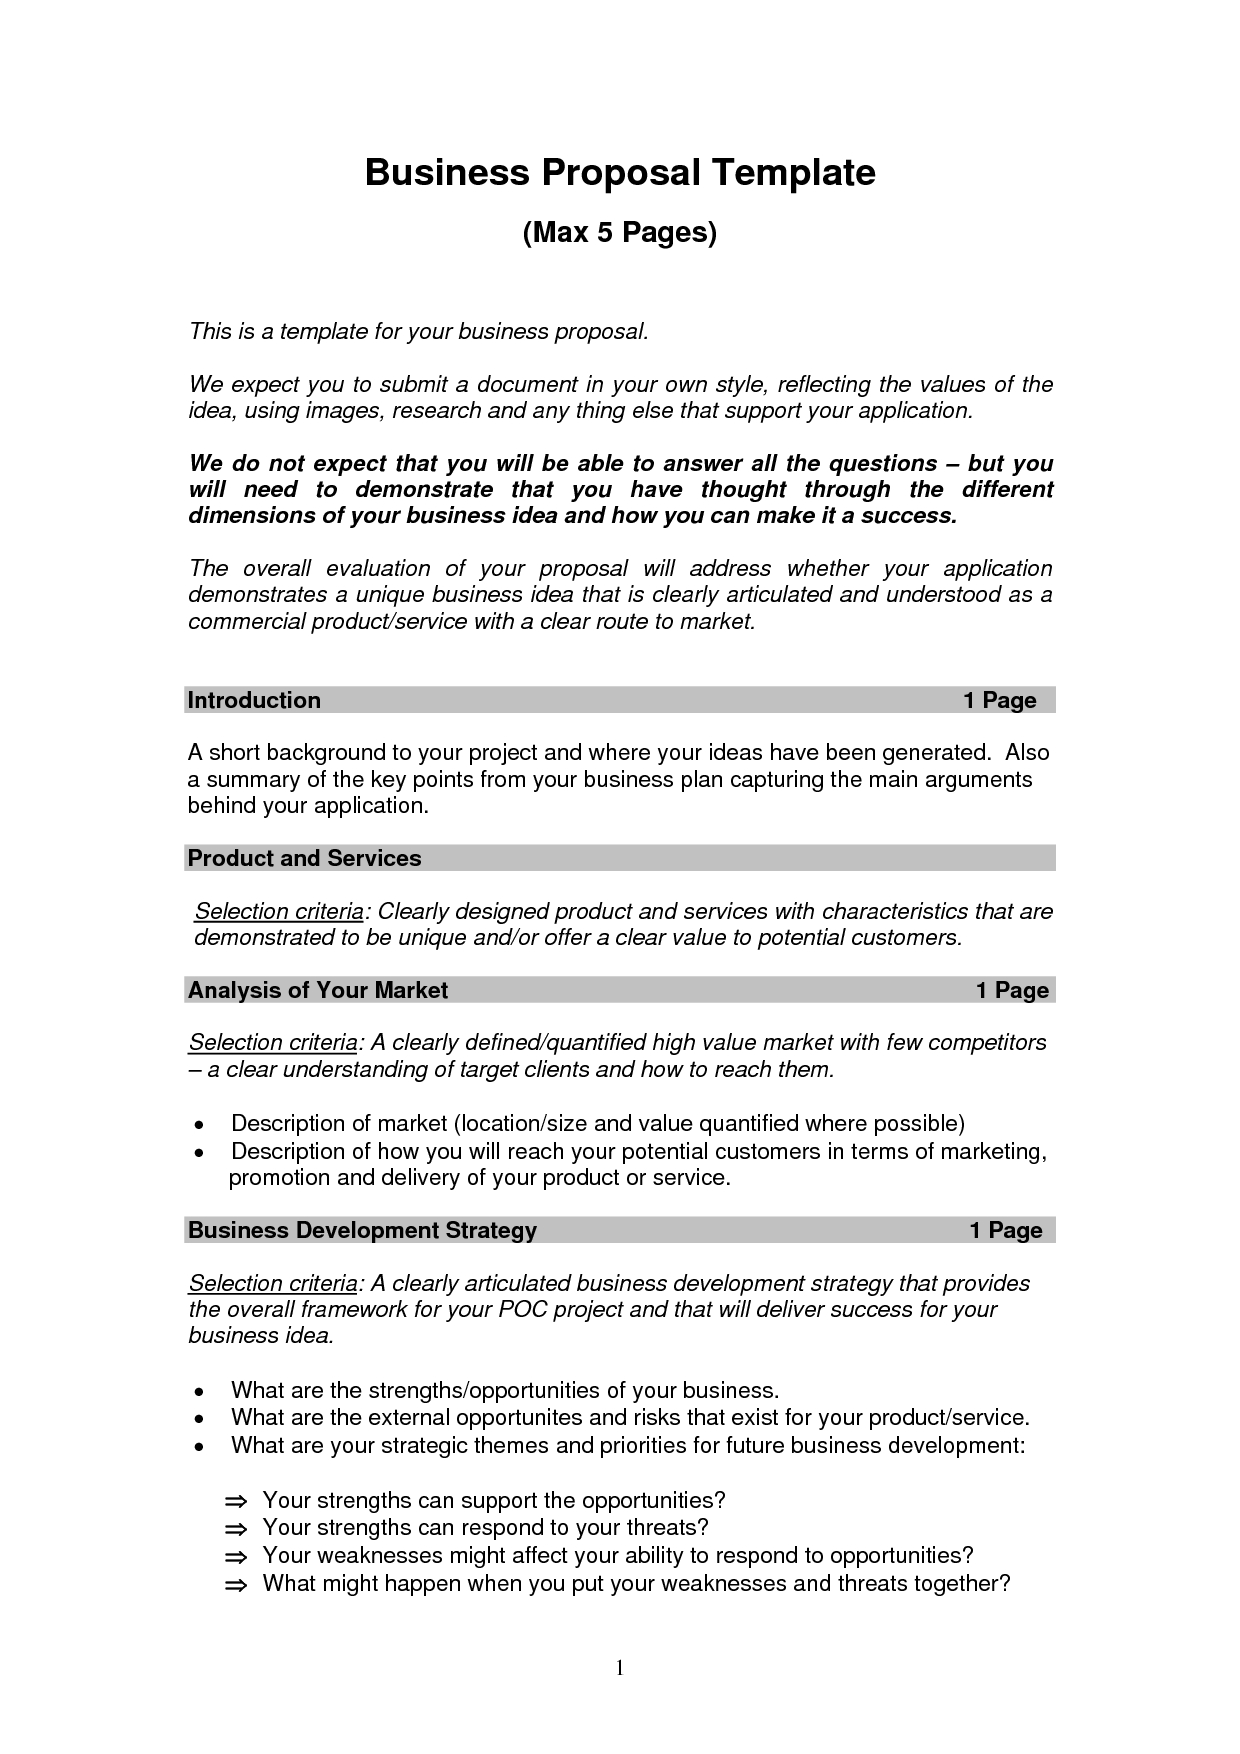 Business Proposal Templates Examples  Business Proposal Sample throughout Business Idea Template For Proposal